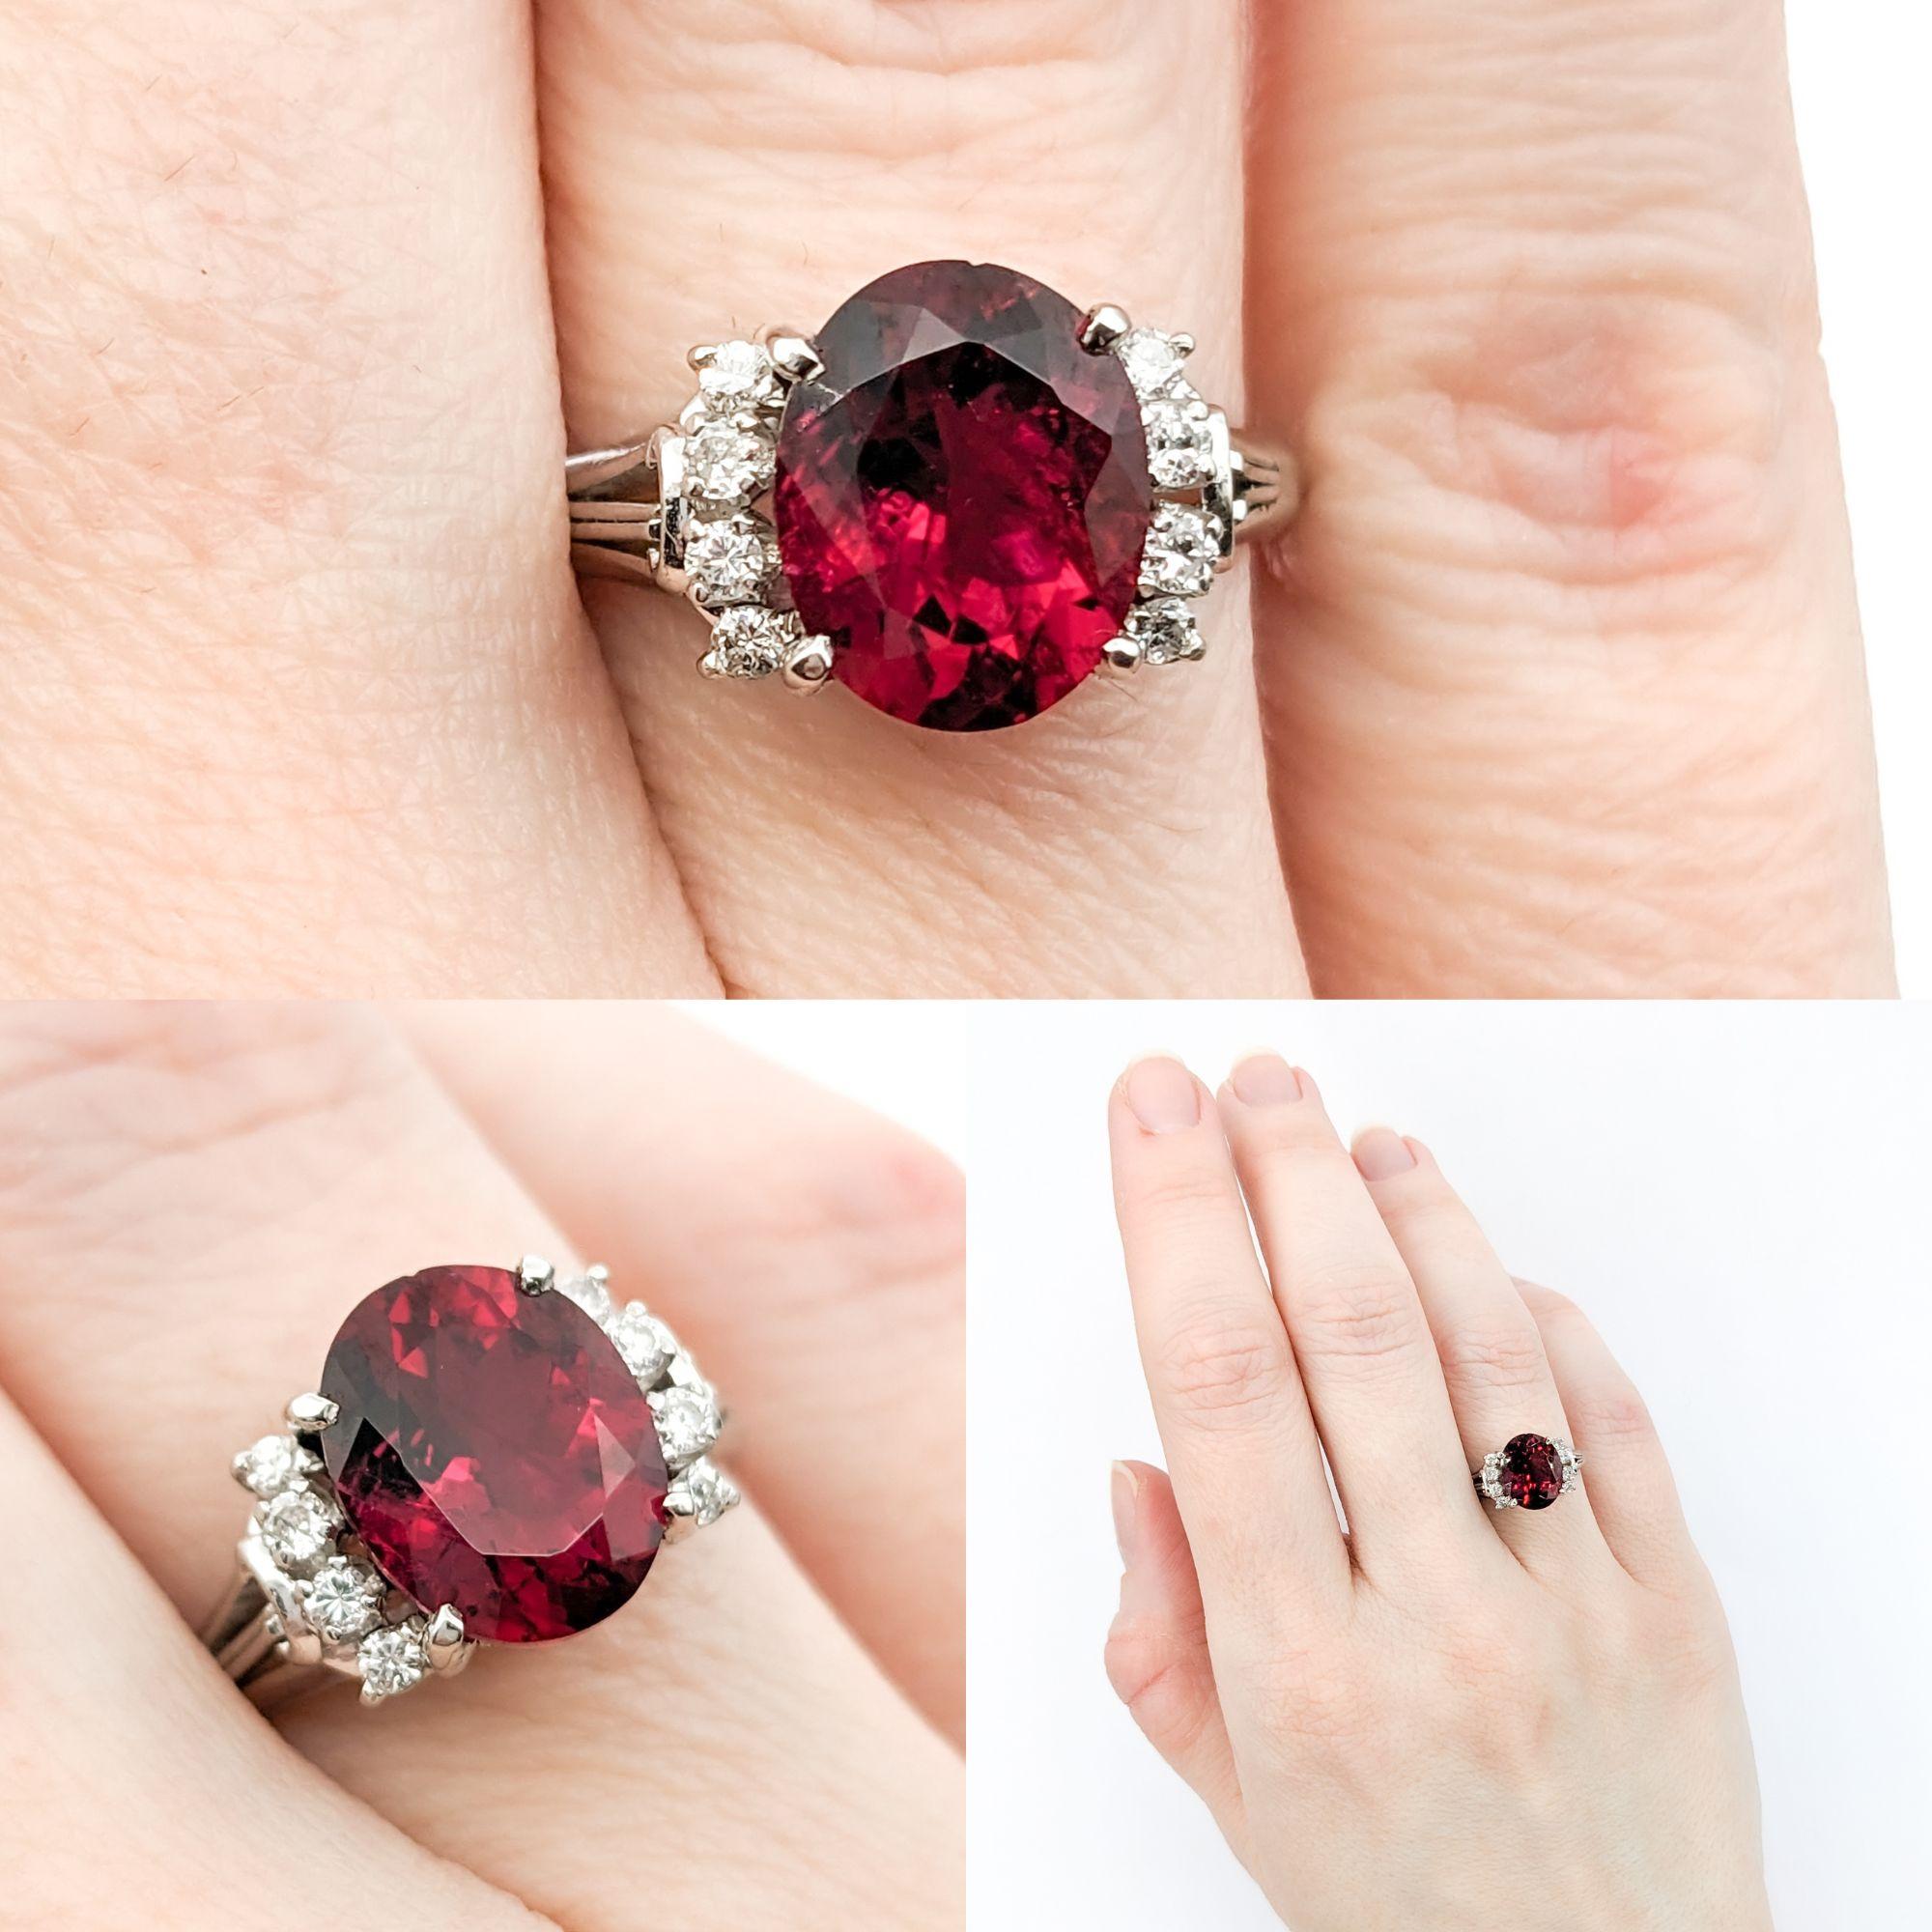 2.39ct Rubellite Tourmaline & Diamond Ring In Platinum

This stunning Tourmaline Ring is finely crafted in 900 Platinum. The centerpiece is a captivating 2.39ct Rubellite Tourmaline, adding a rich pop of pinkish red color. The tourmaline is further